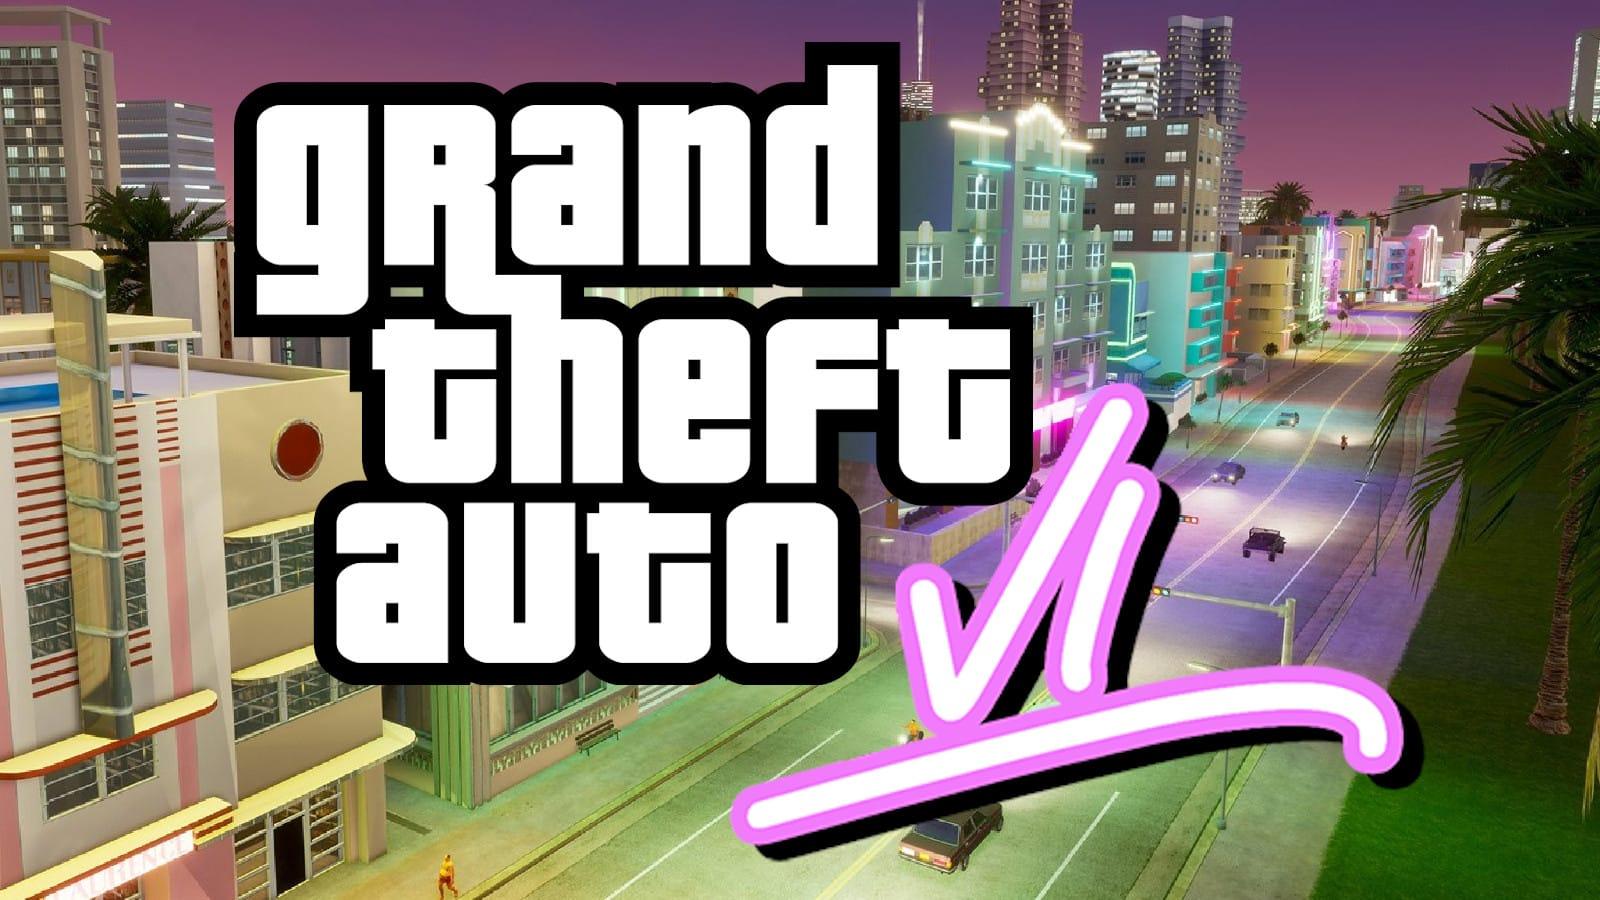 3 locations from previous games that GTA 6 can possibly revisit